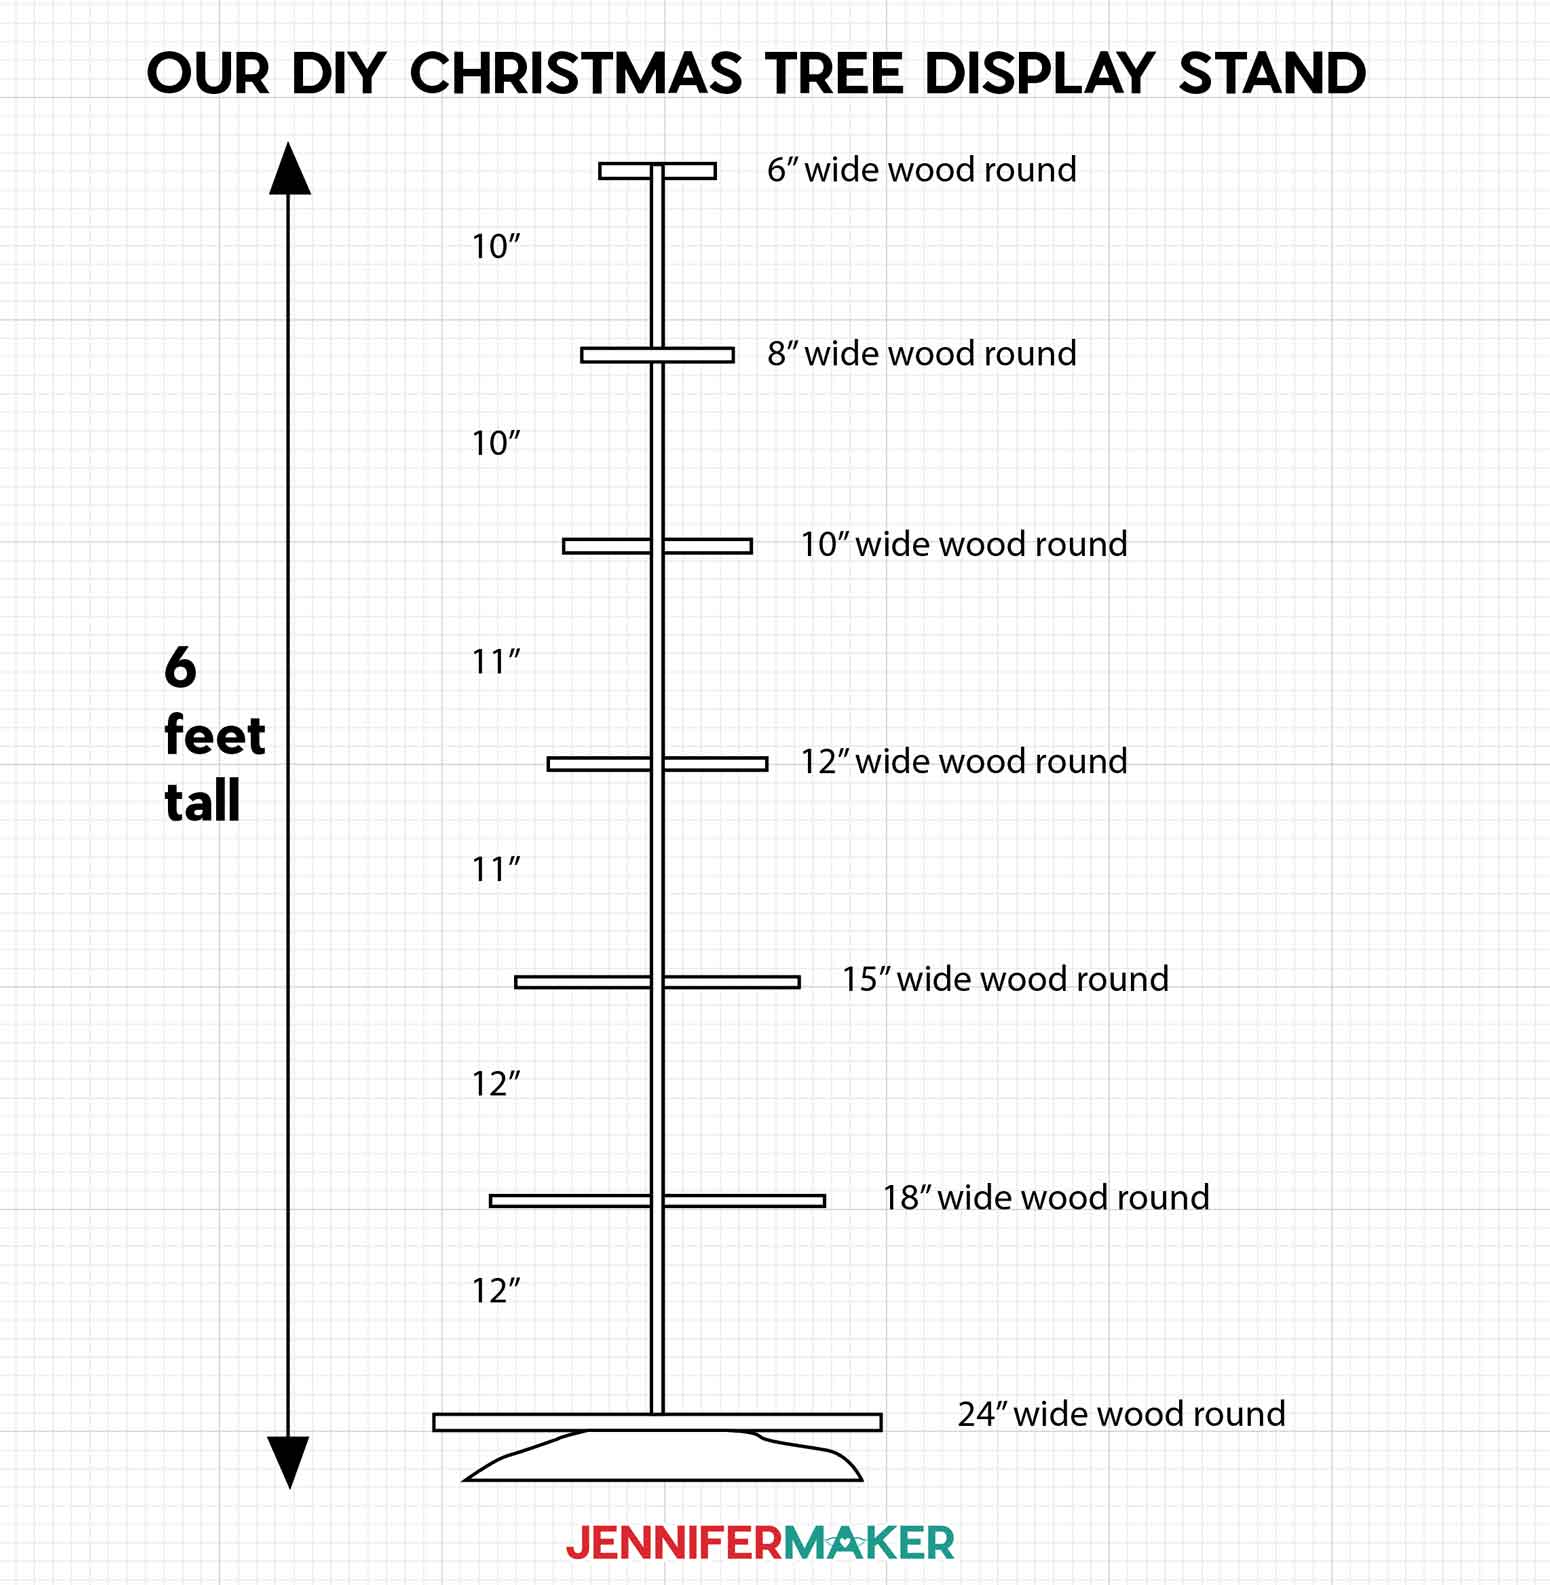 DIY Christmas Tree Display Stand diagram with measurements